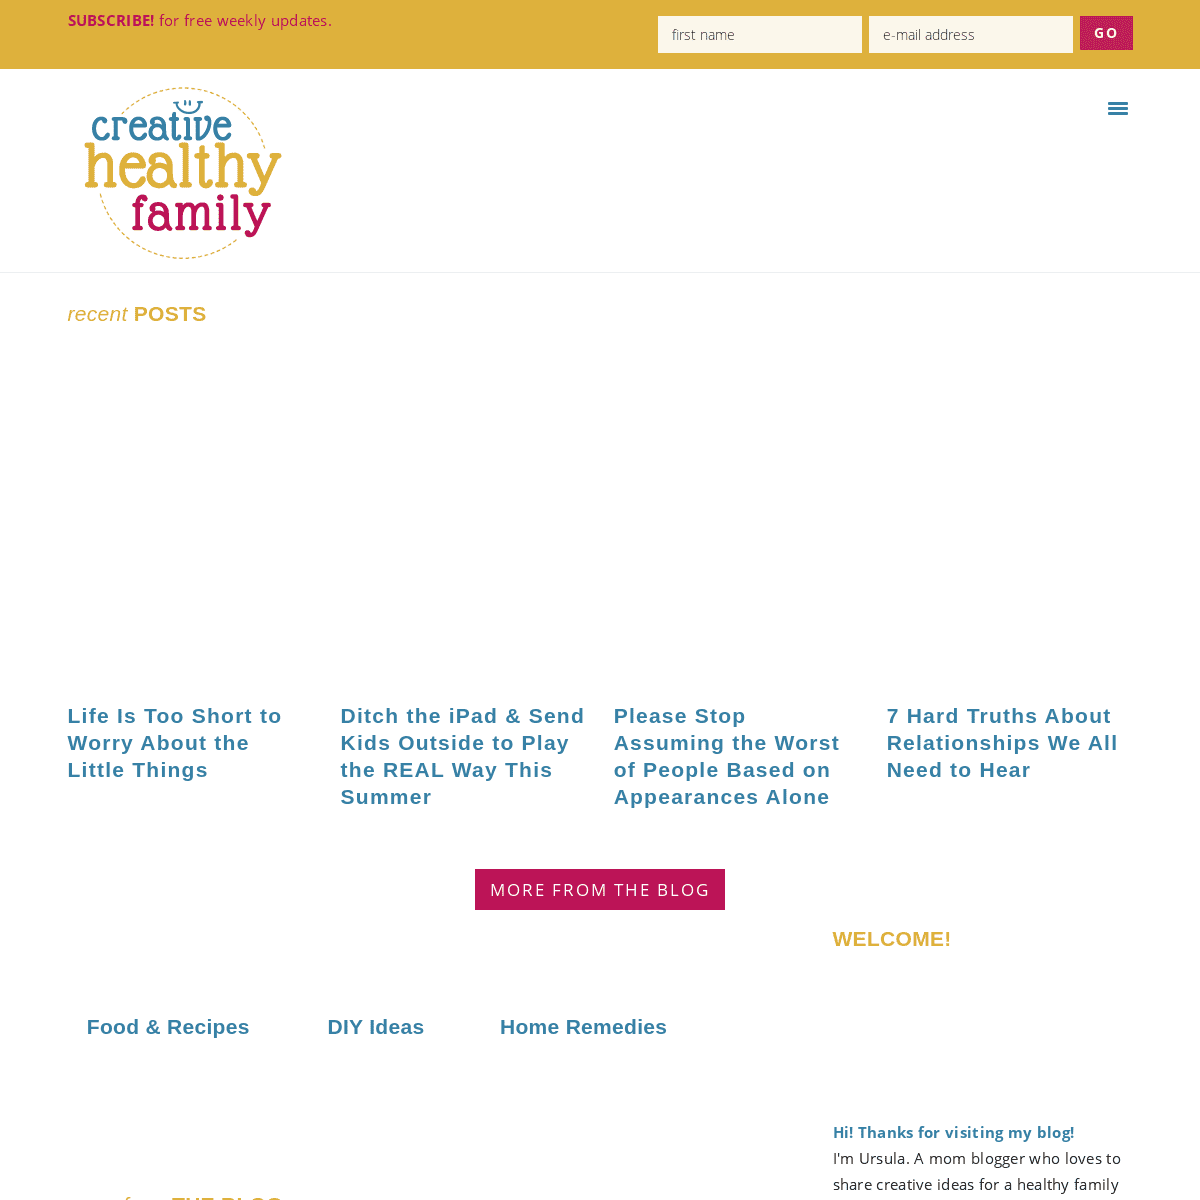 A complete backup of https://creativehealthyfamily.com